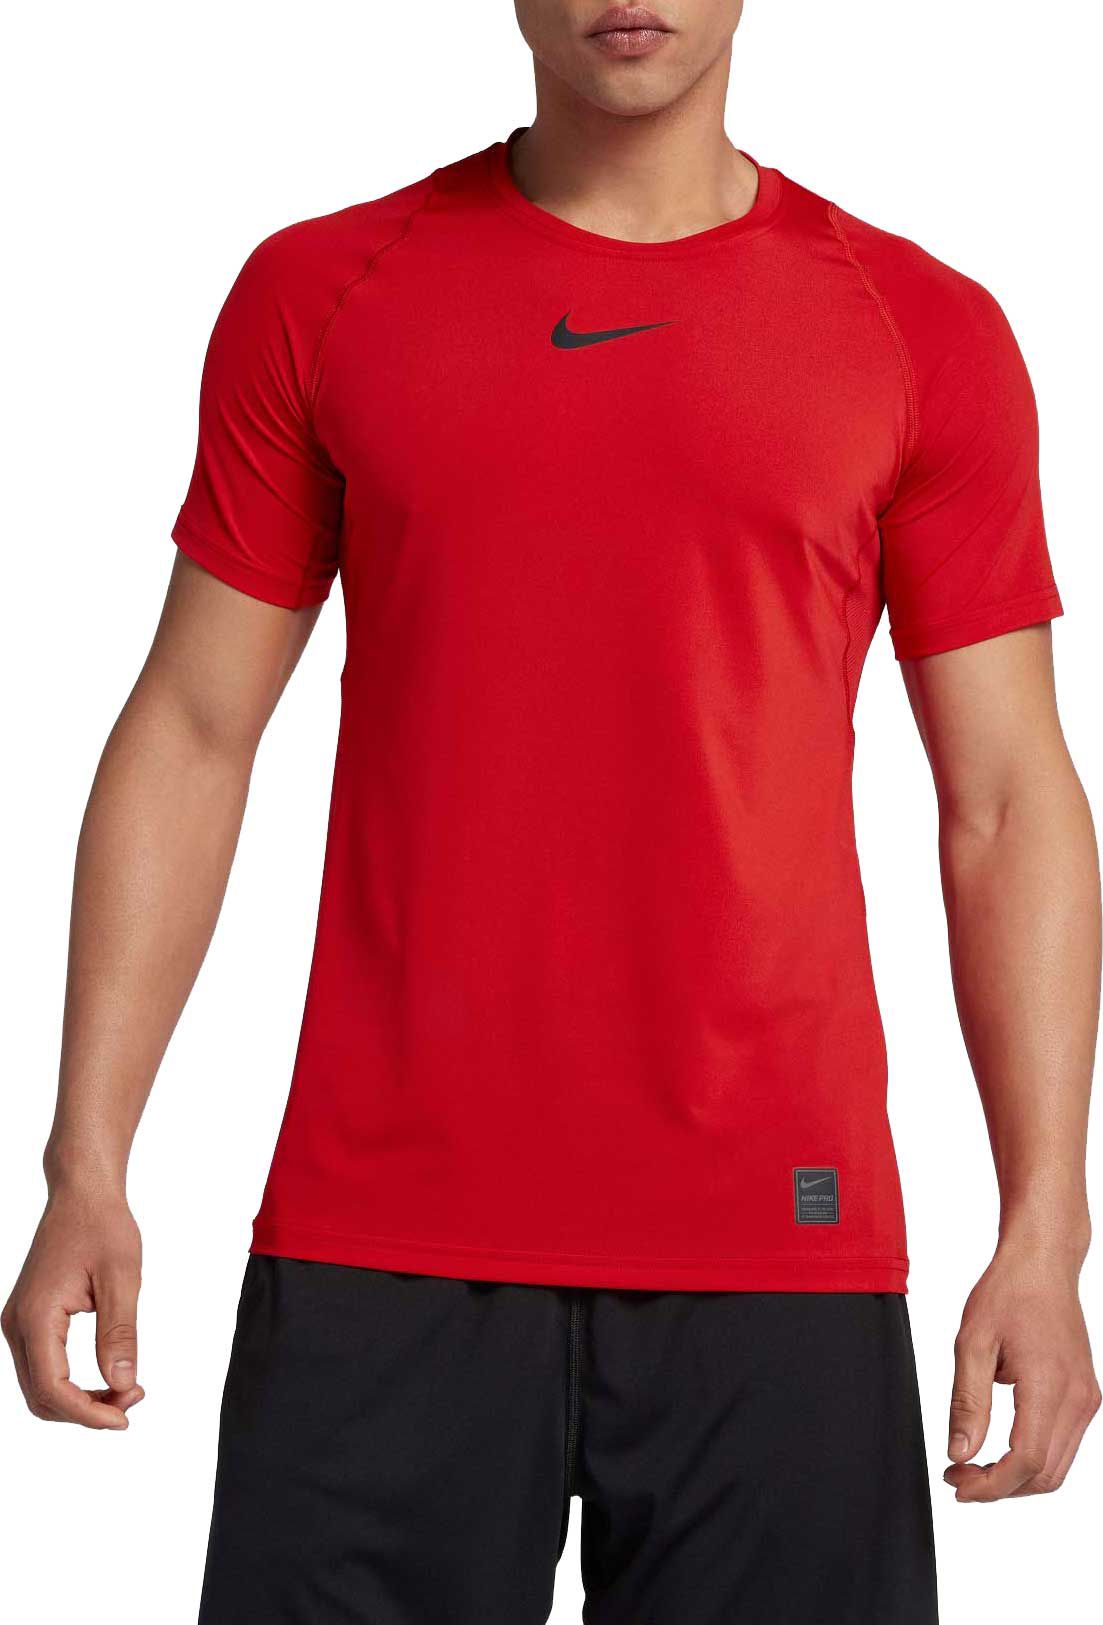 fitted red shirt